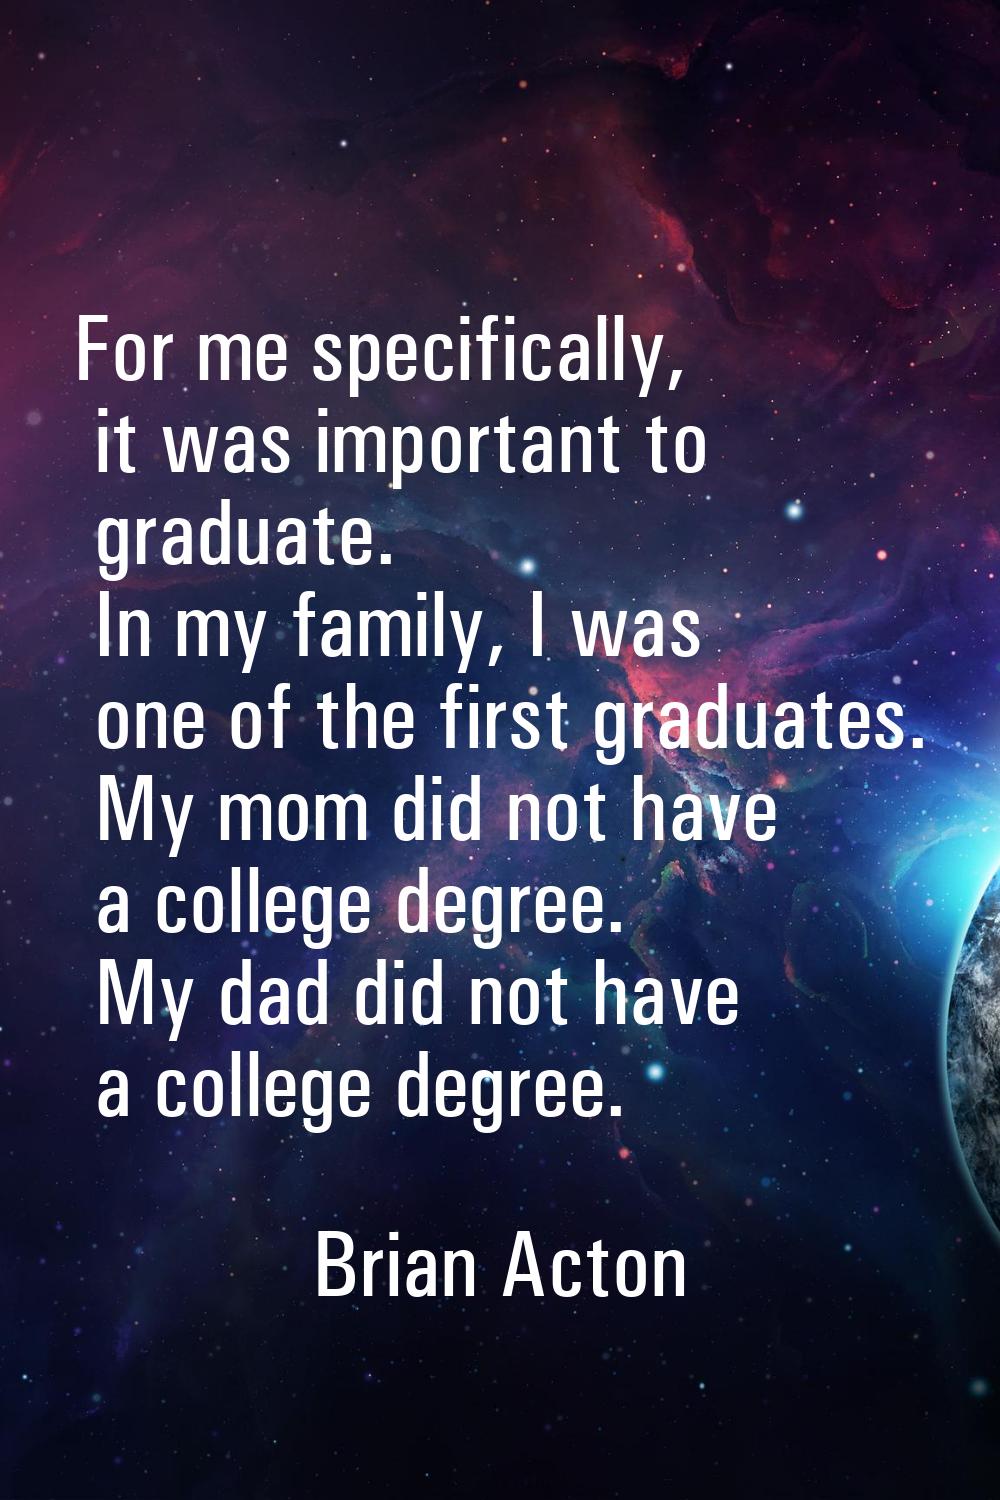 For me specifically, it was important to graduate. In my family, I was one of the first graduates. 